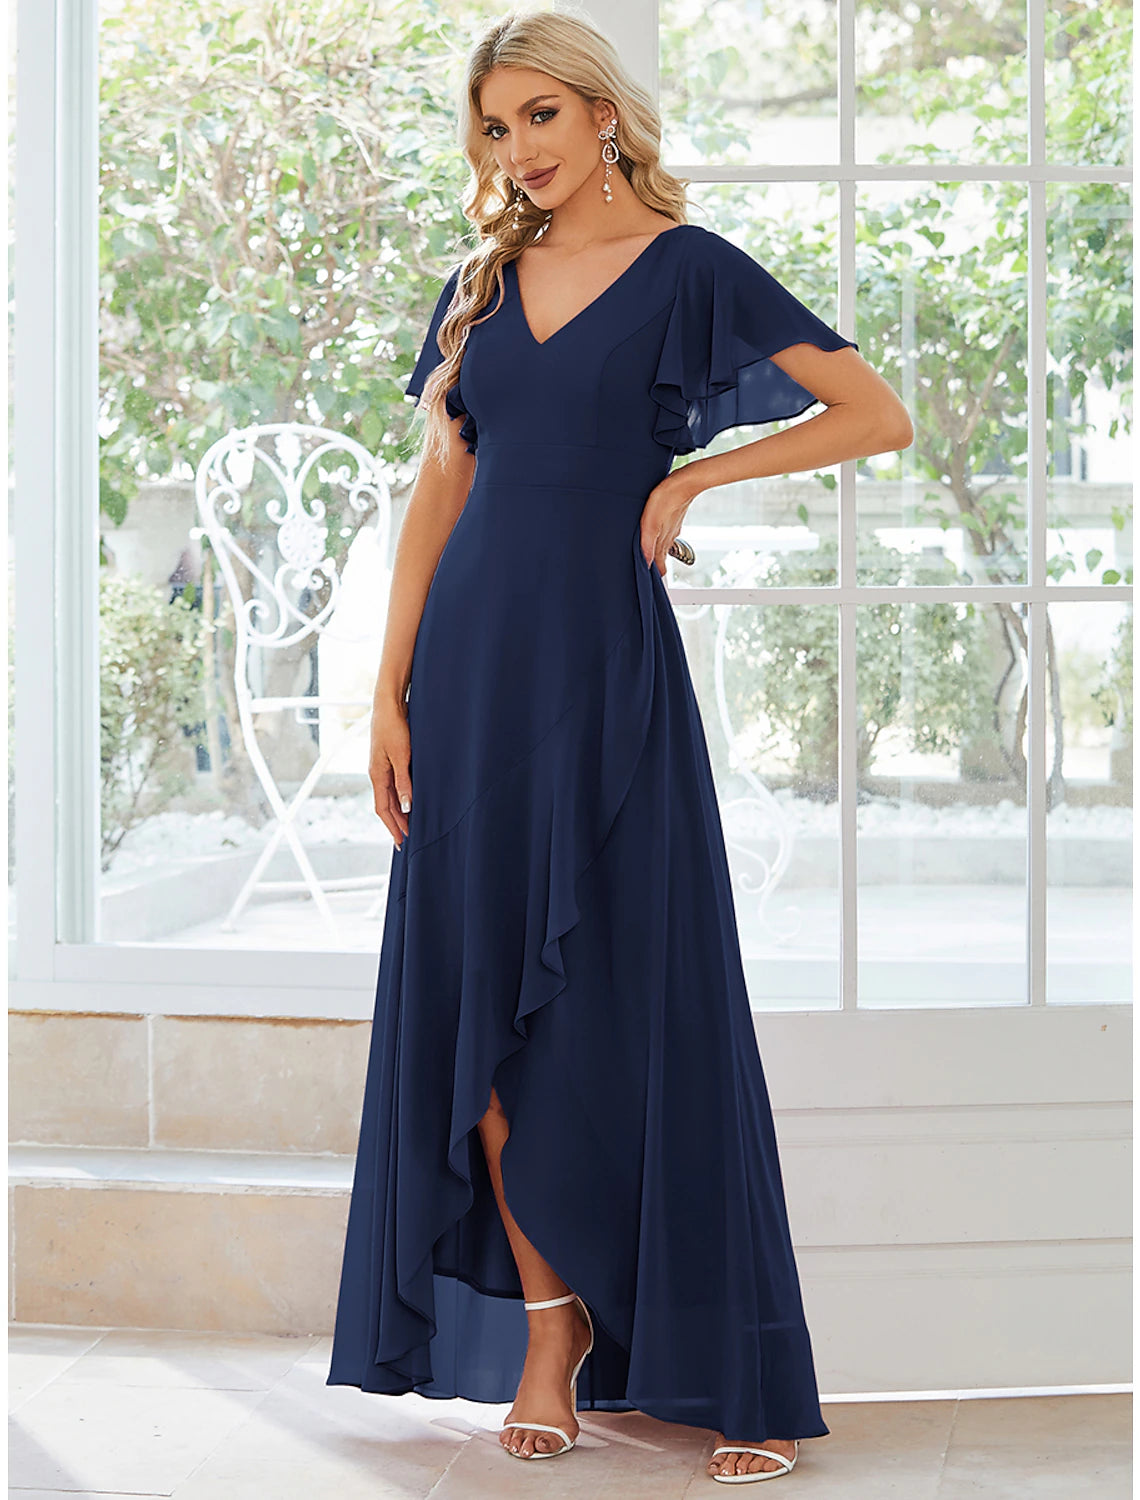 A-Line Wedding Guest Dresses Casual Dress Party Dress Wedding Party Asymmetrical Short Sleeve V Neck Bridesmaid Dress Chiffon with Ruffles Pure Color